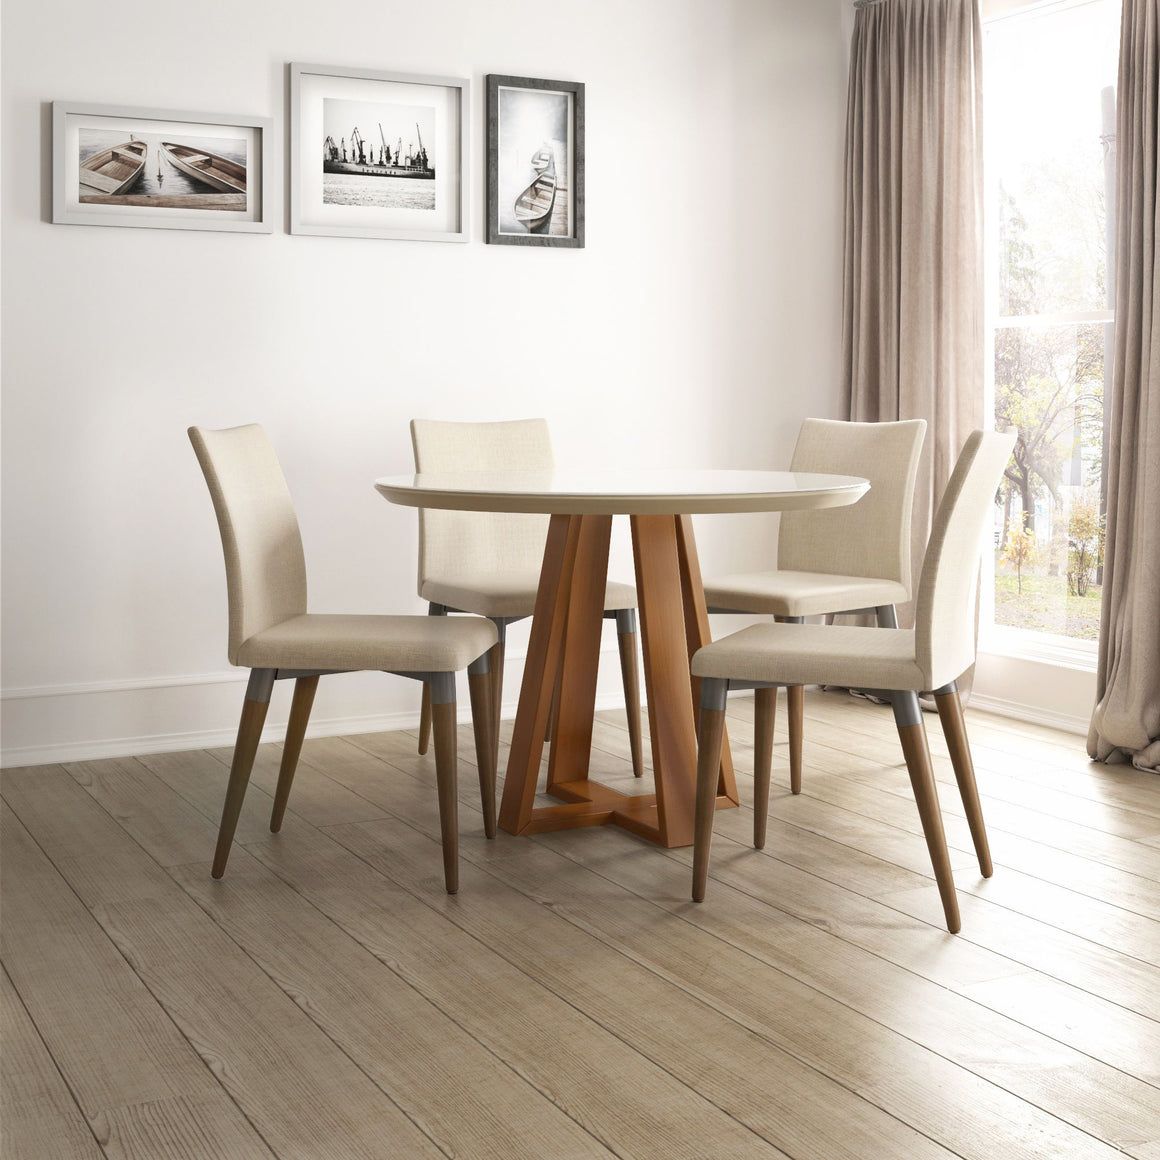 Duffy 45.27 Modern Round Dining Table and Charles Dining Chairs in Off White and Dark Beige - Set of 5